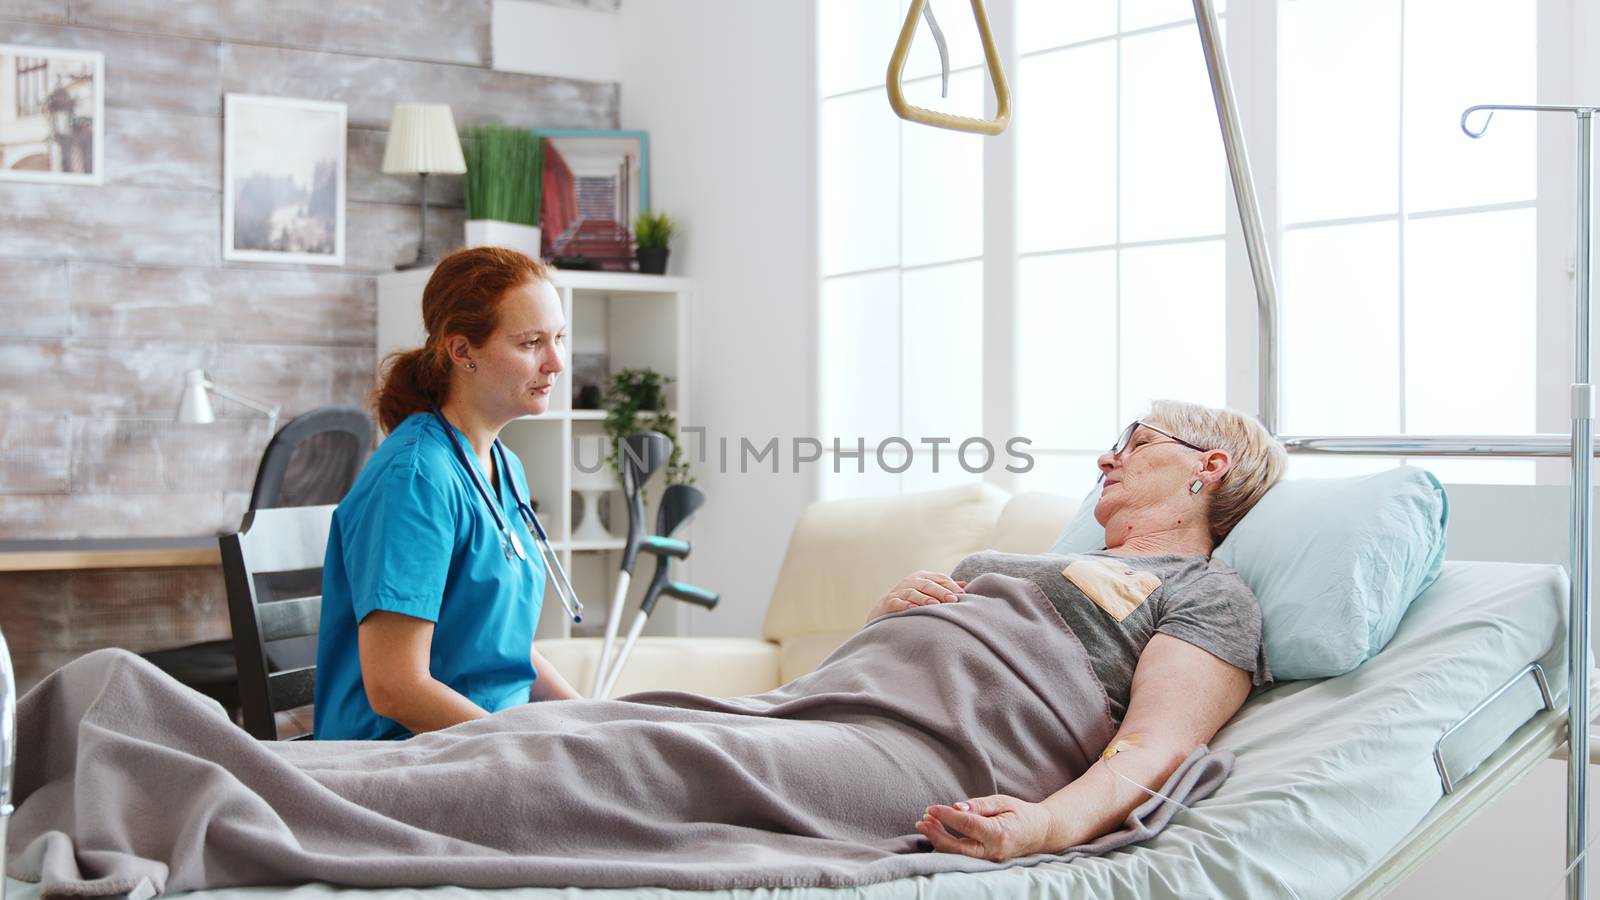 Nurse in retirement home talking with an old lady lying in hospital bed. Big windows with bright light are behind